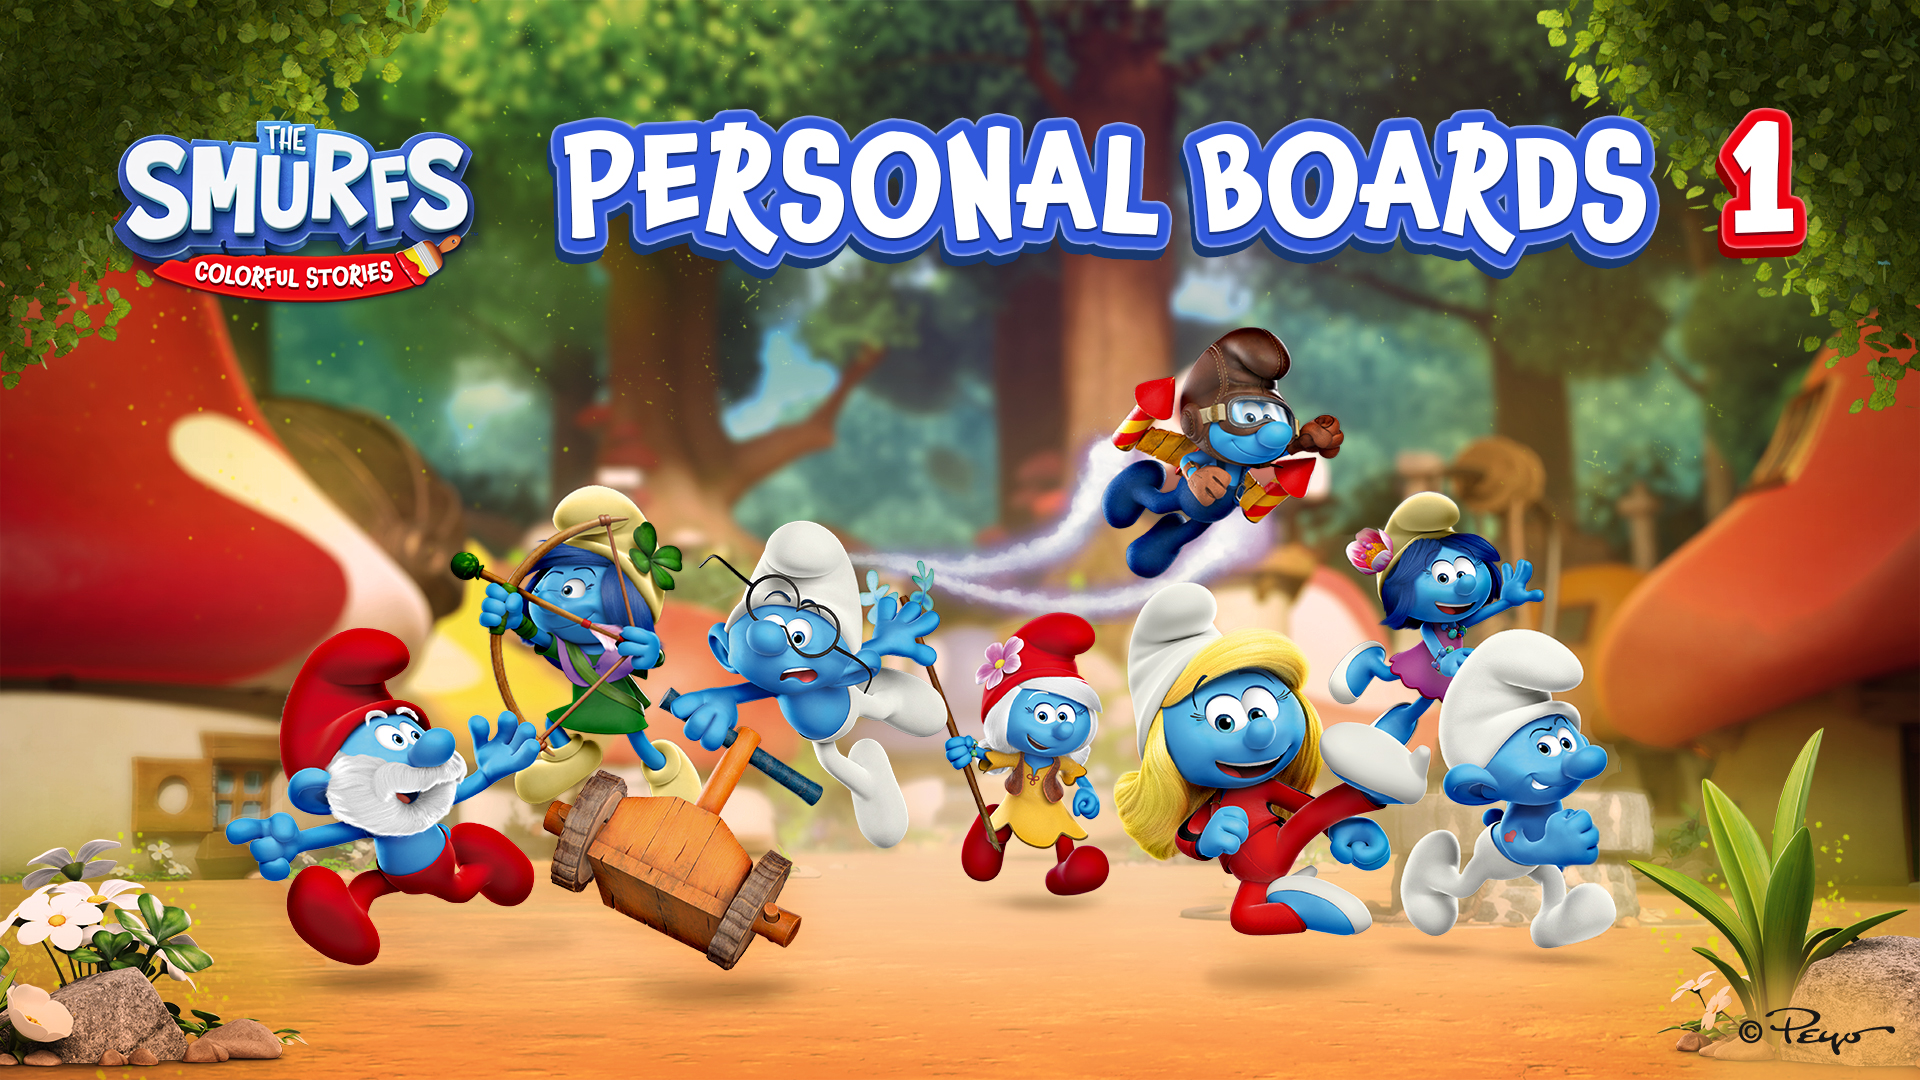 Personal Boards 1